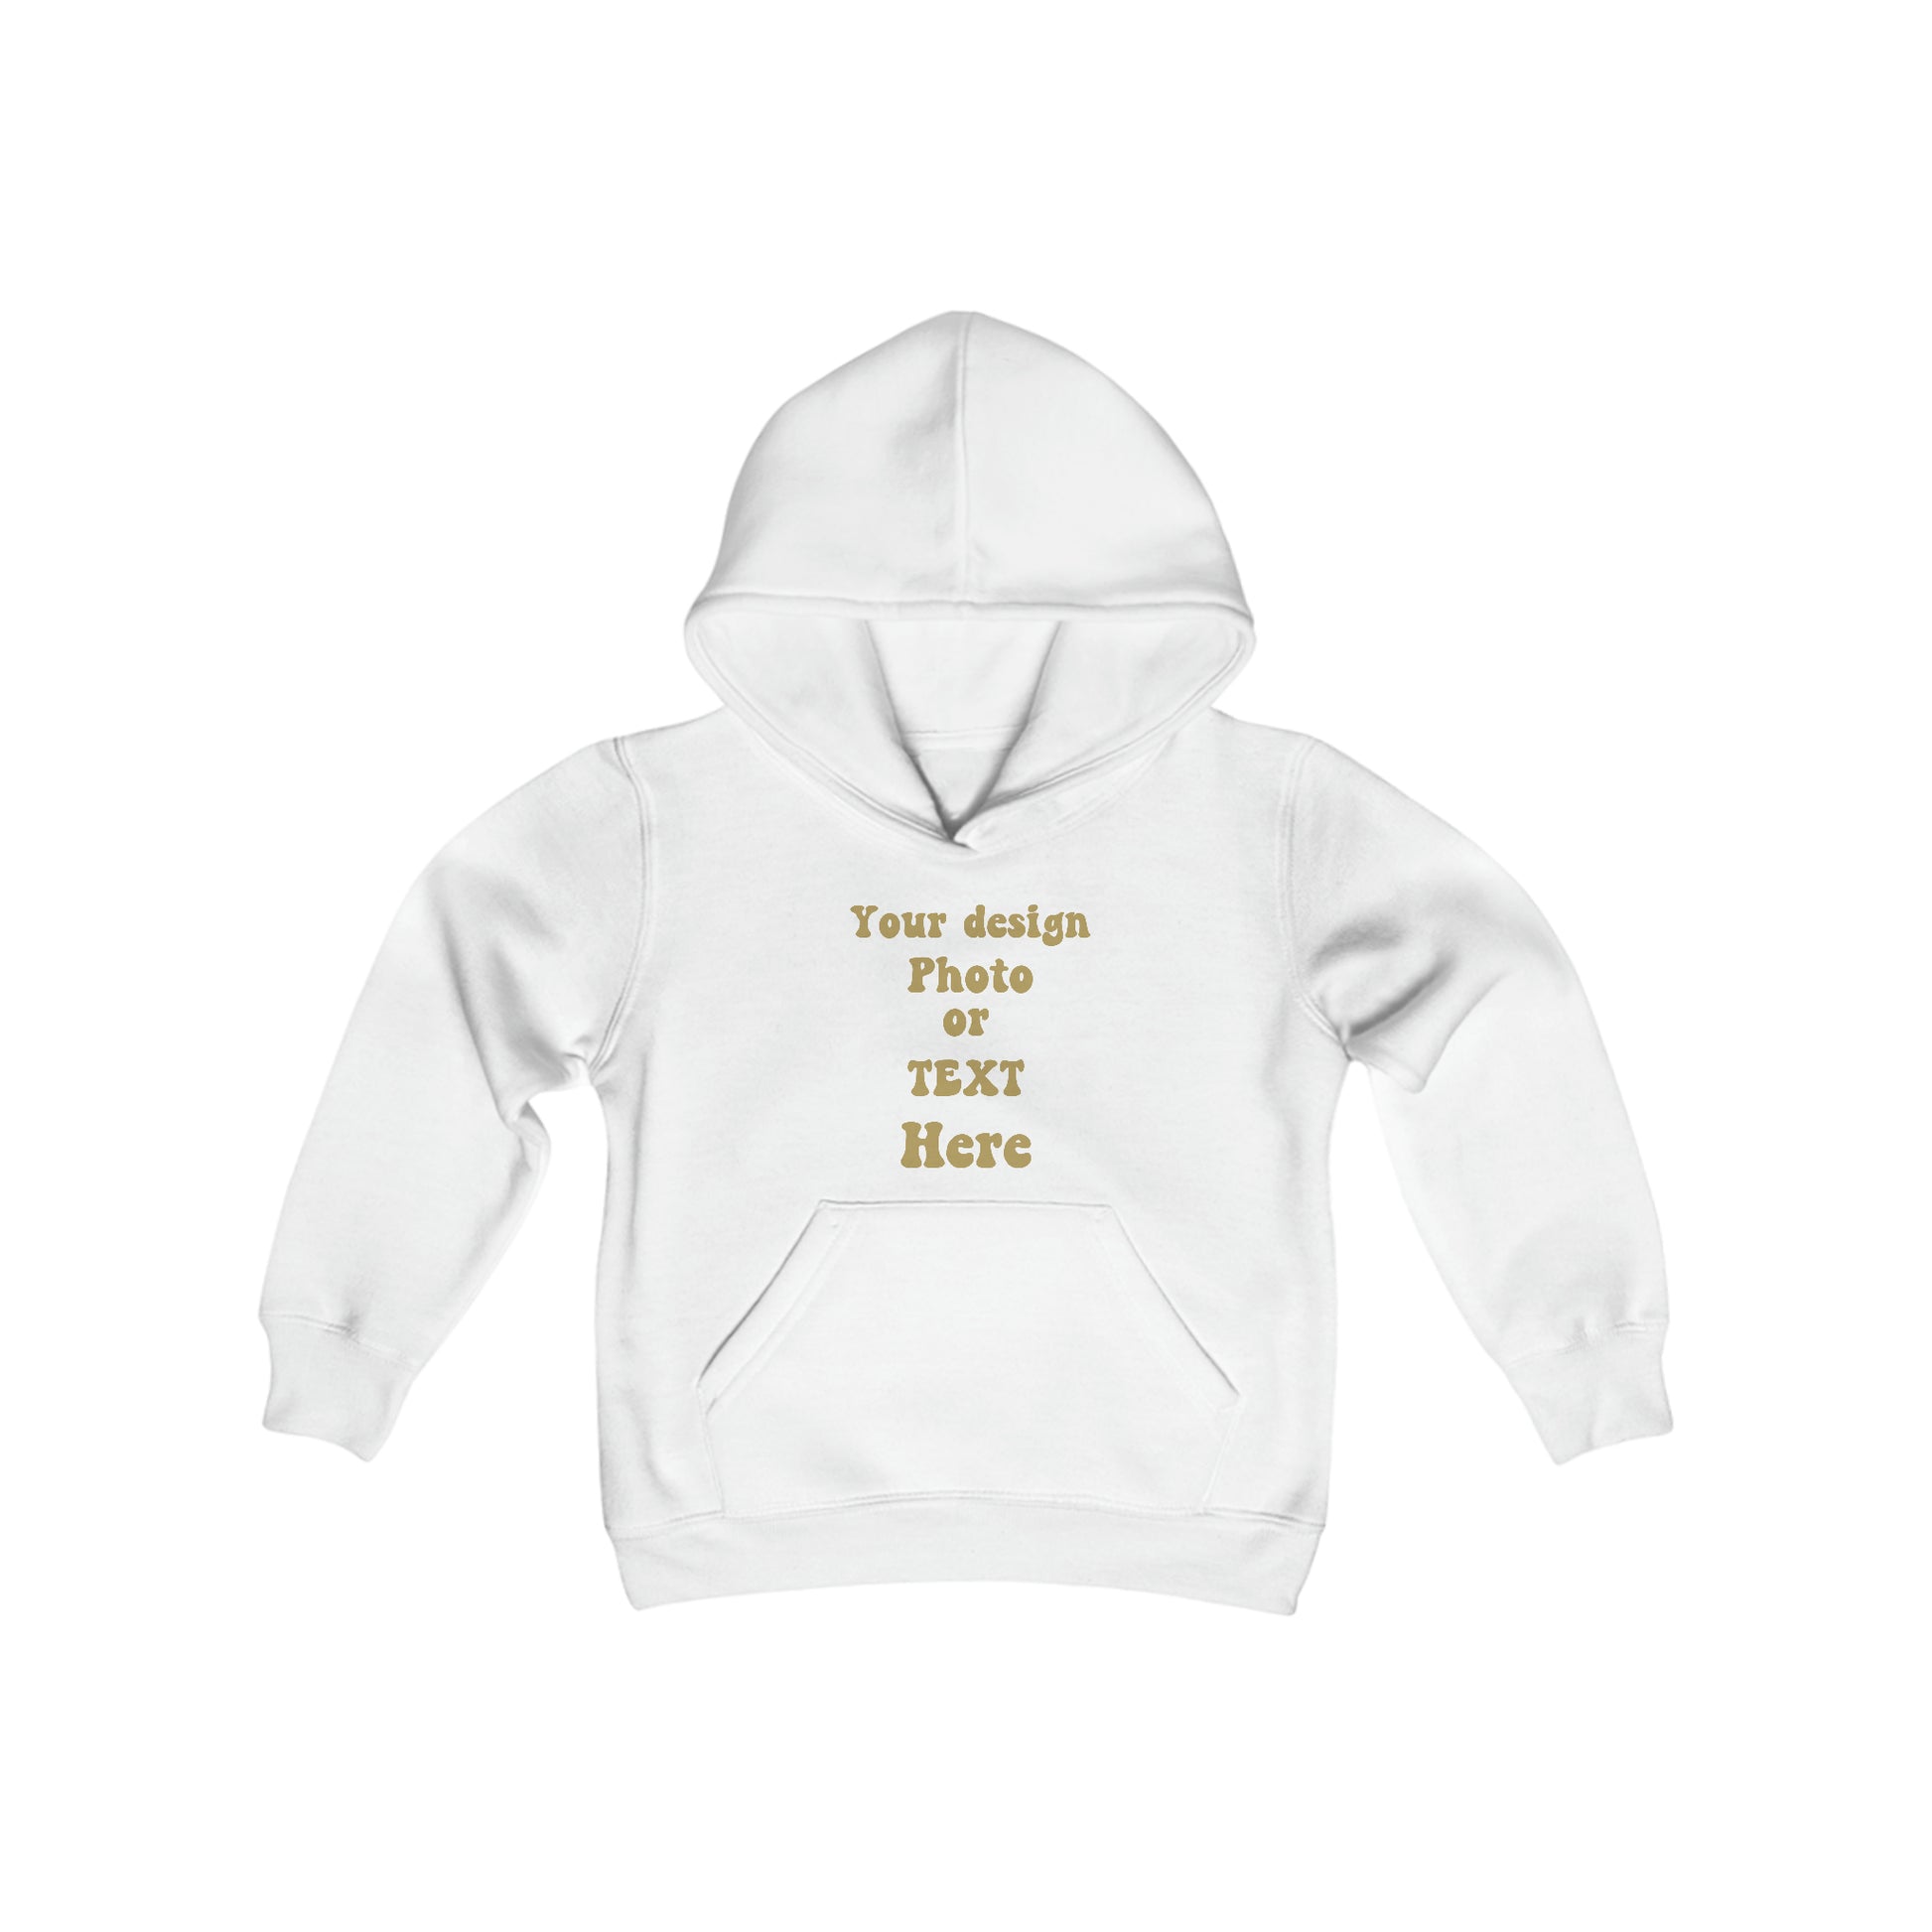 Youth Heavy Blend Hooded Sweatshirt - Personalize It with Text and Photo Kids clothes White S 